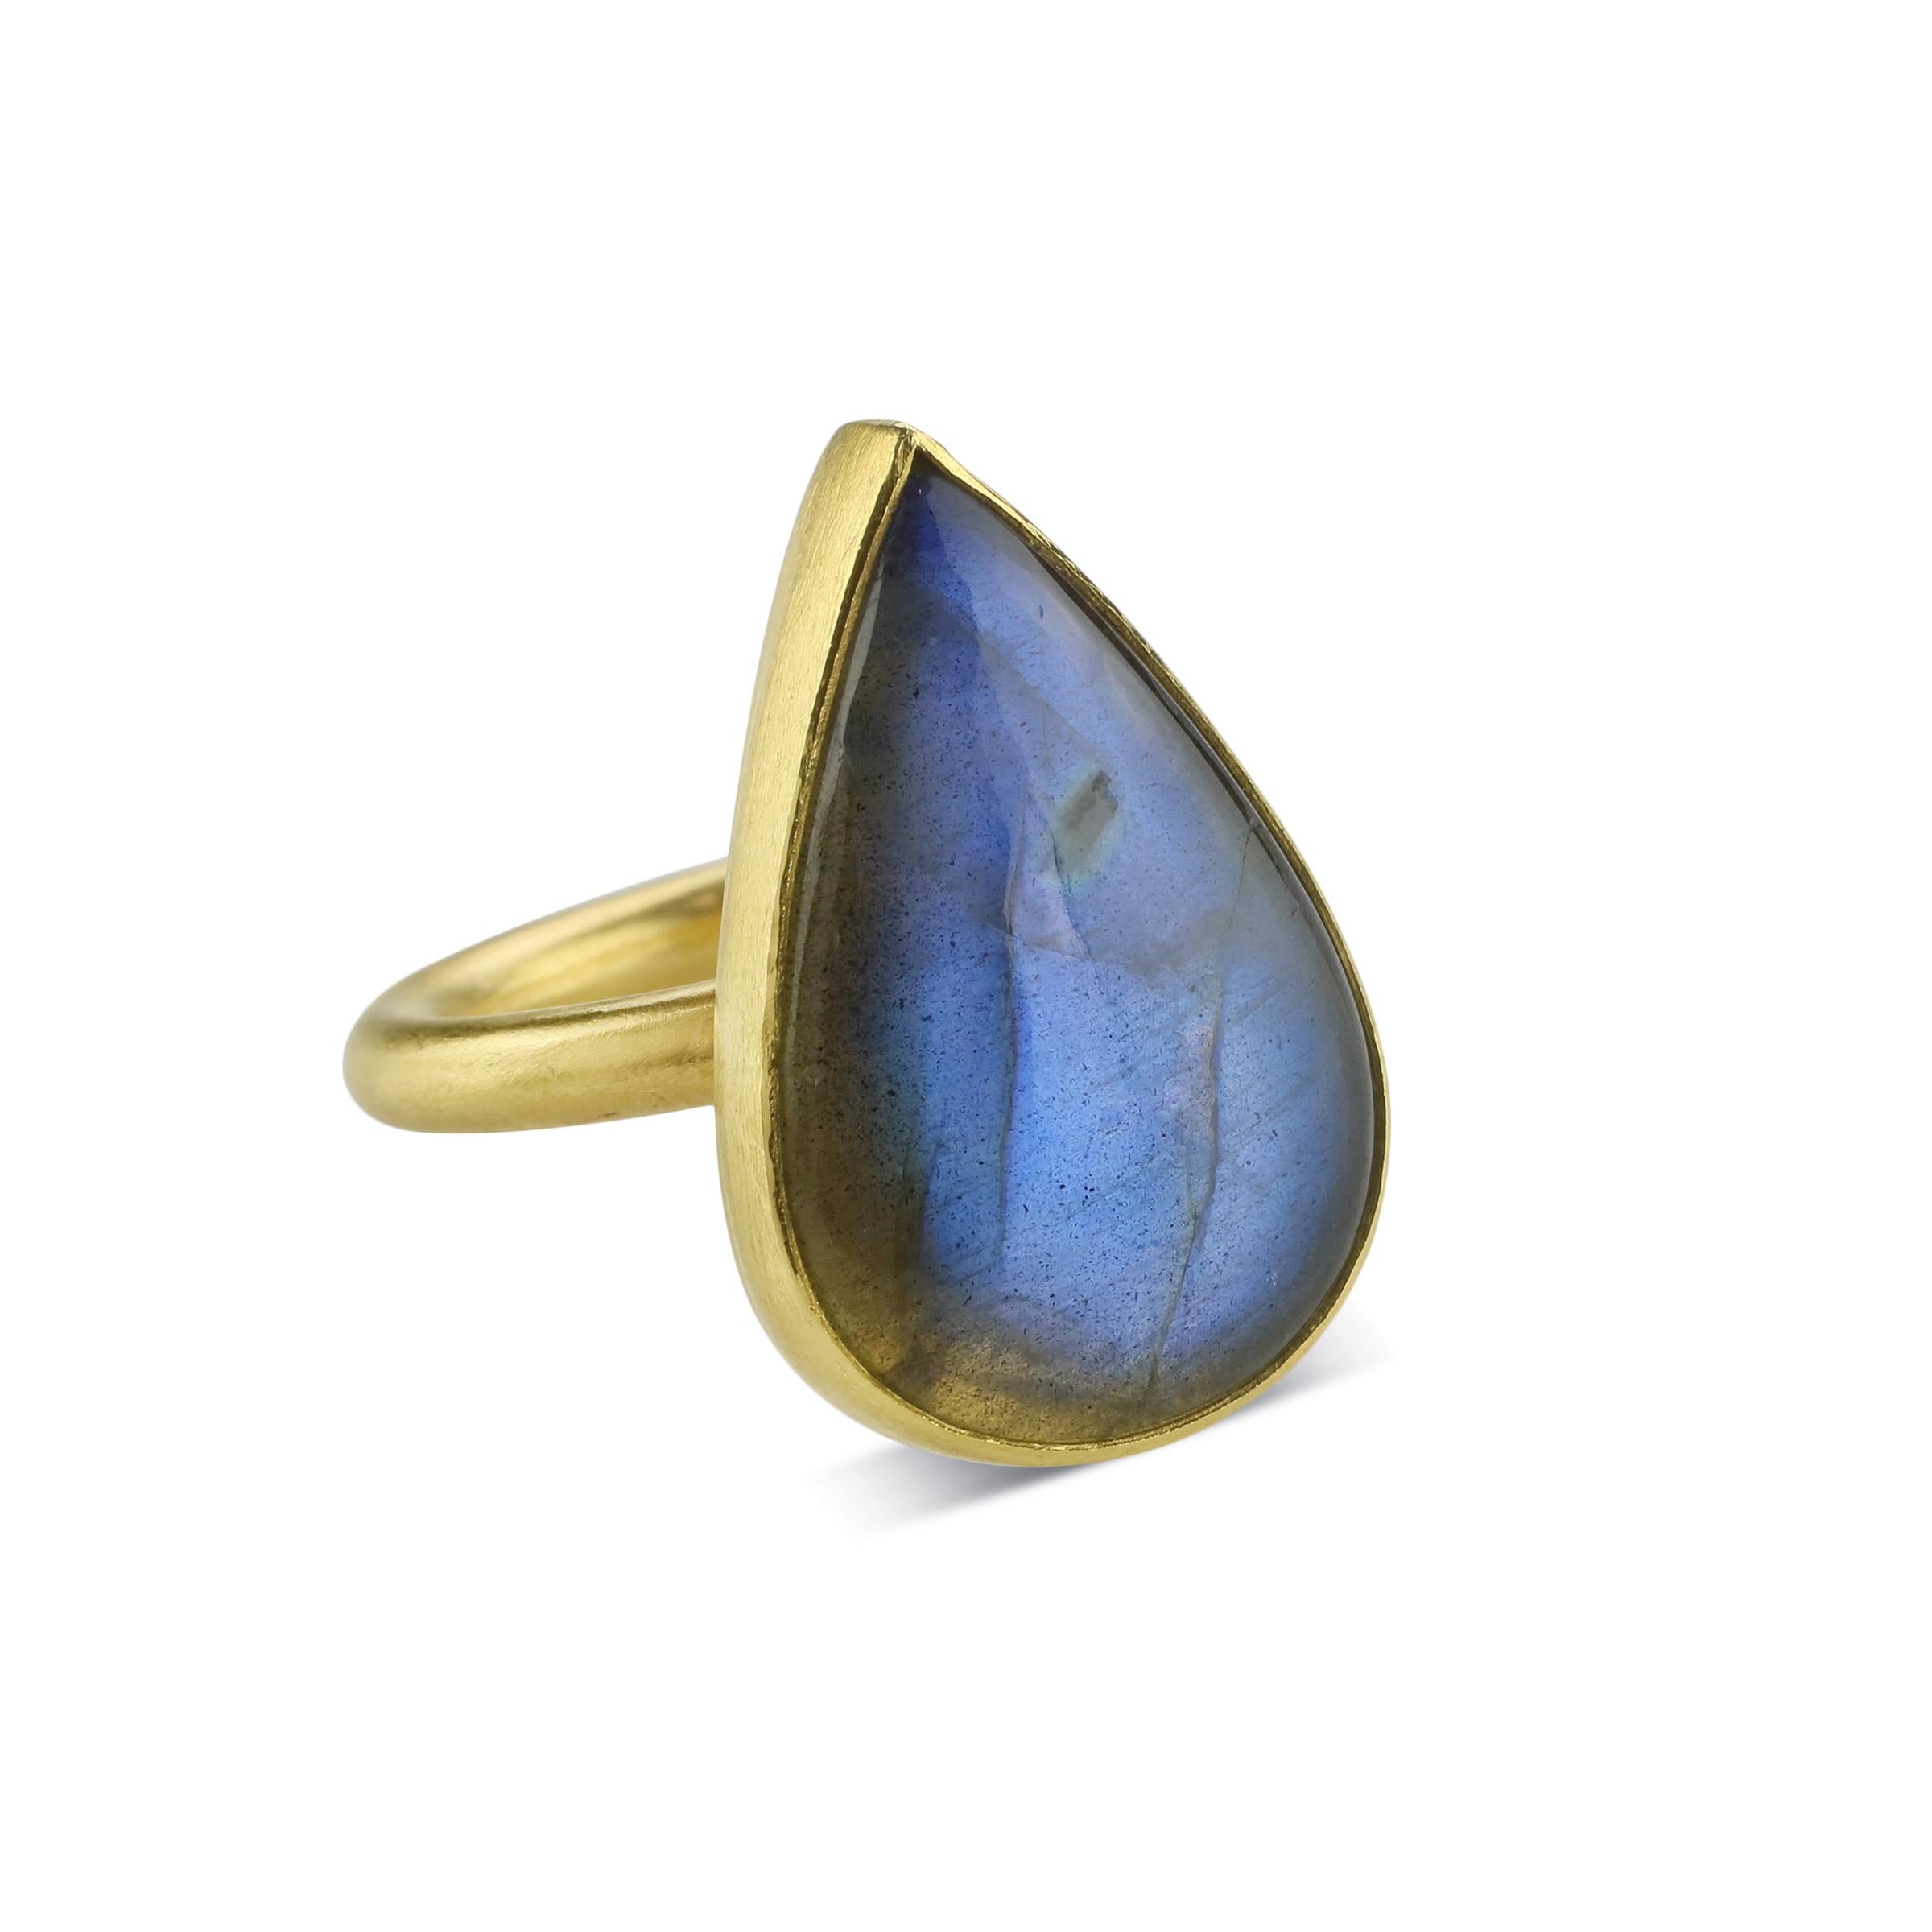 PHILIPPE SPENCER 20.87 Ct. Labradorite in 22K and 20K Gold Statement Ring In New Condition For Sale In Key West, FL